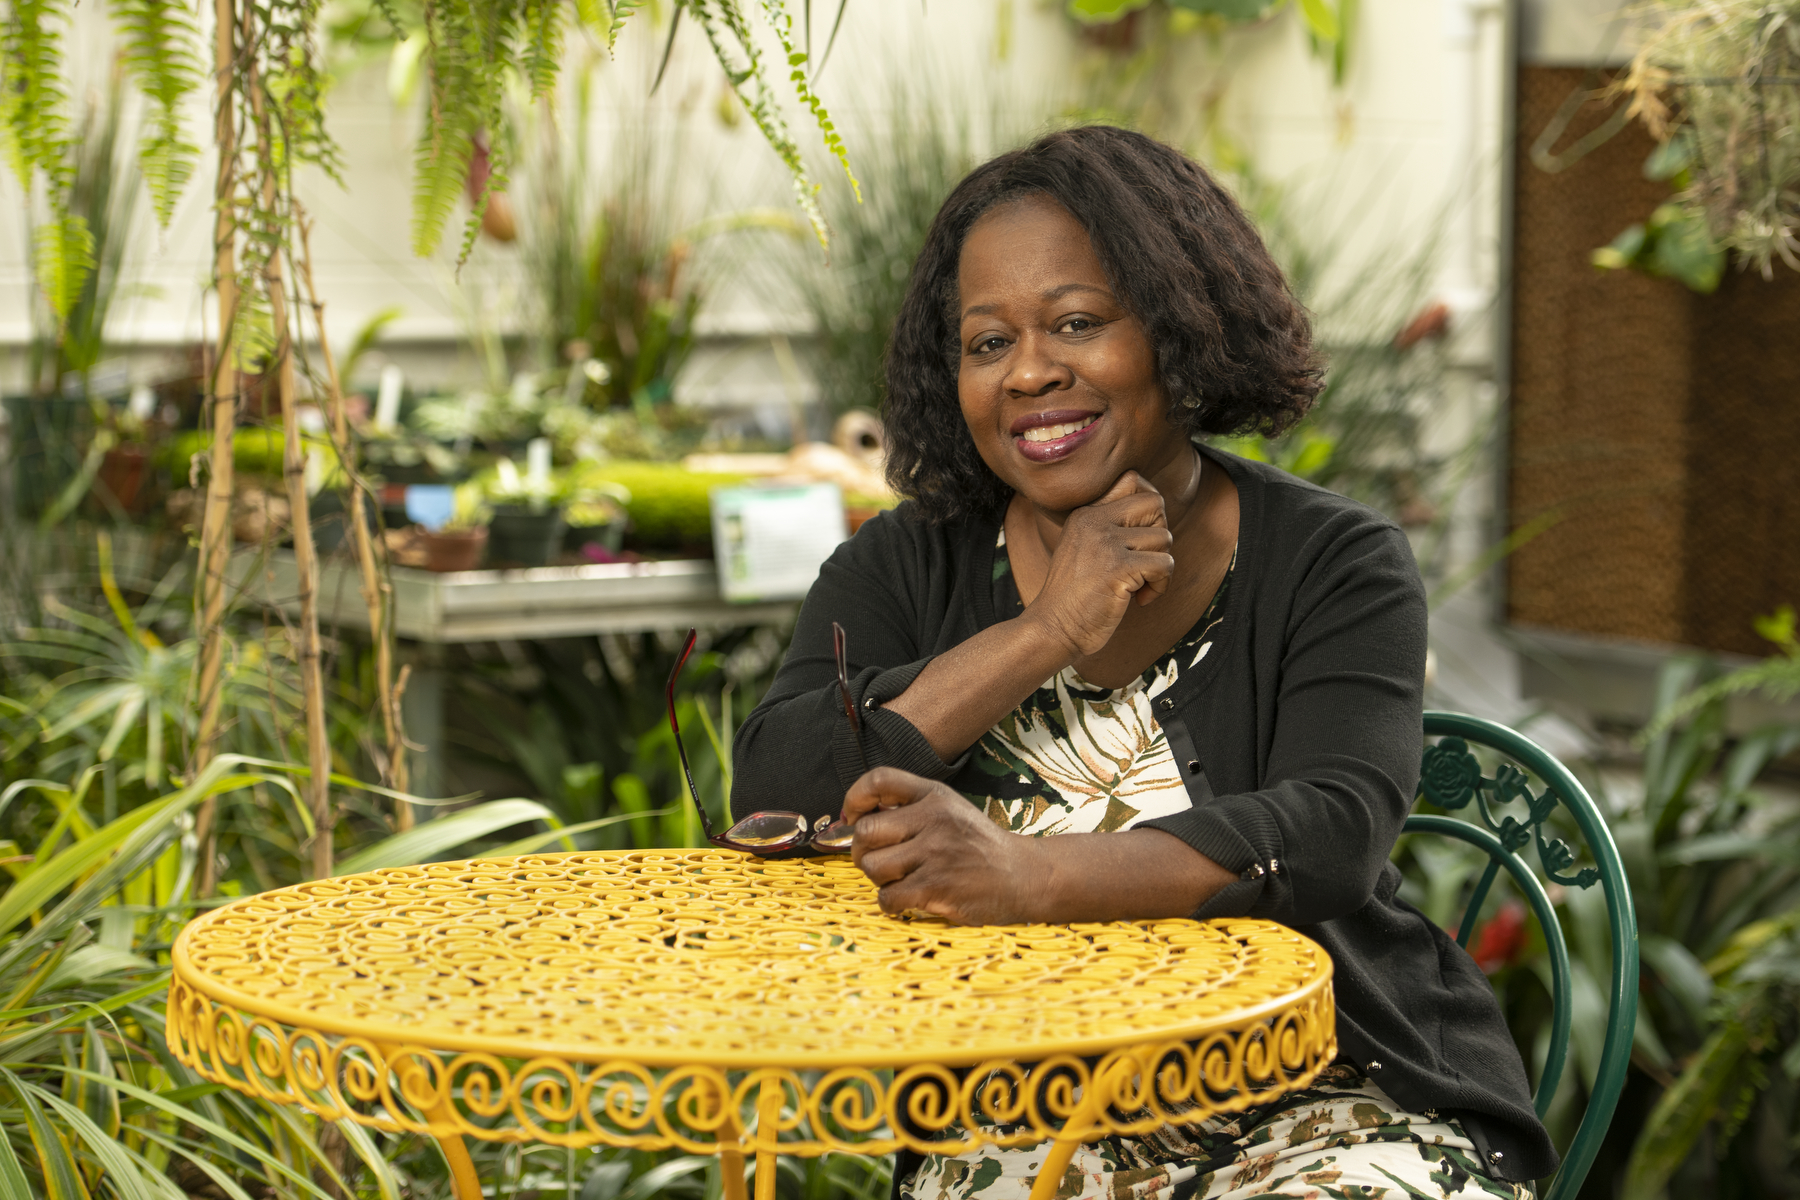 smiling woman wearing a black sweater and flowered dress sits at a yellow table surrounded by plants